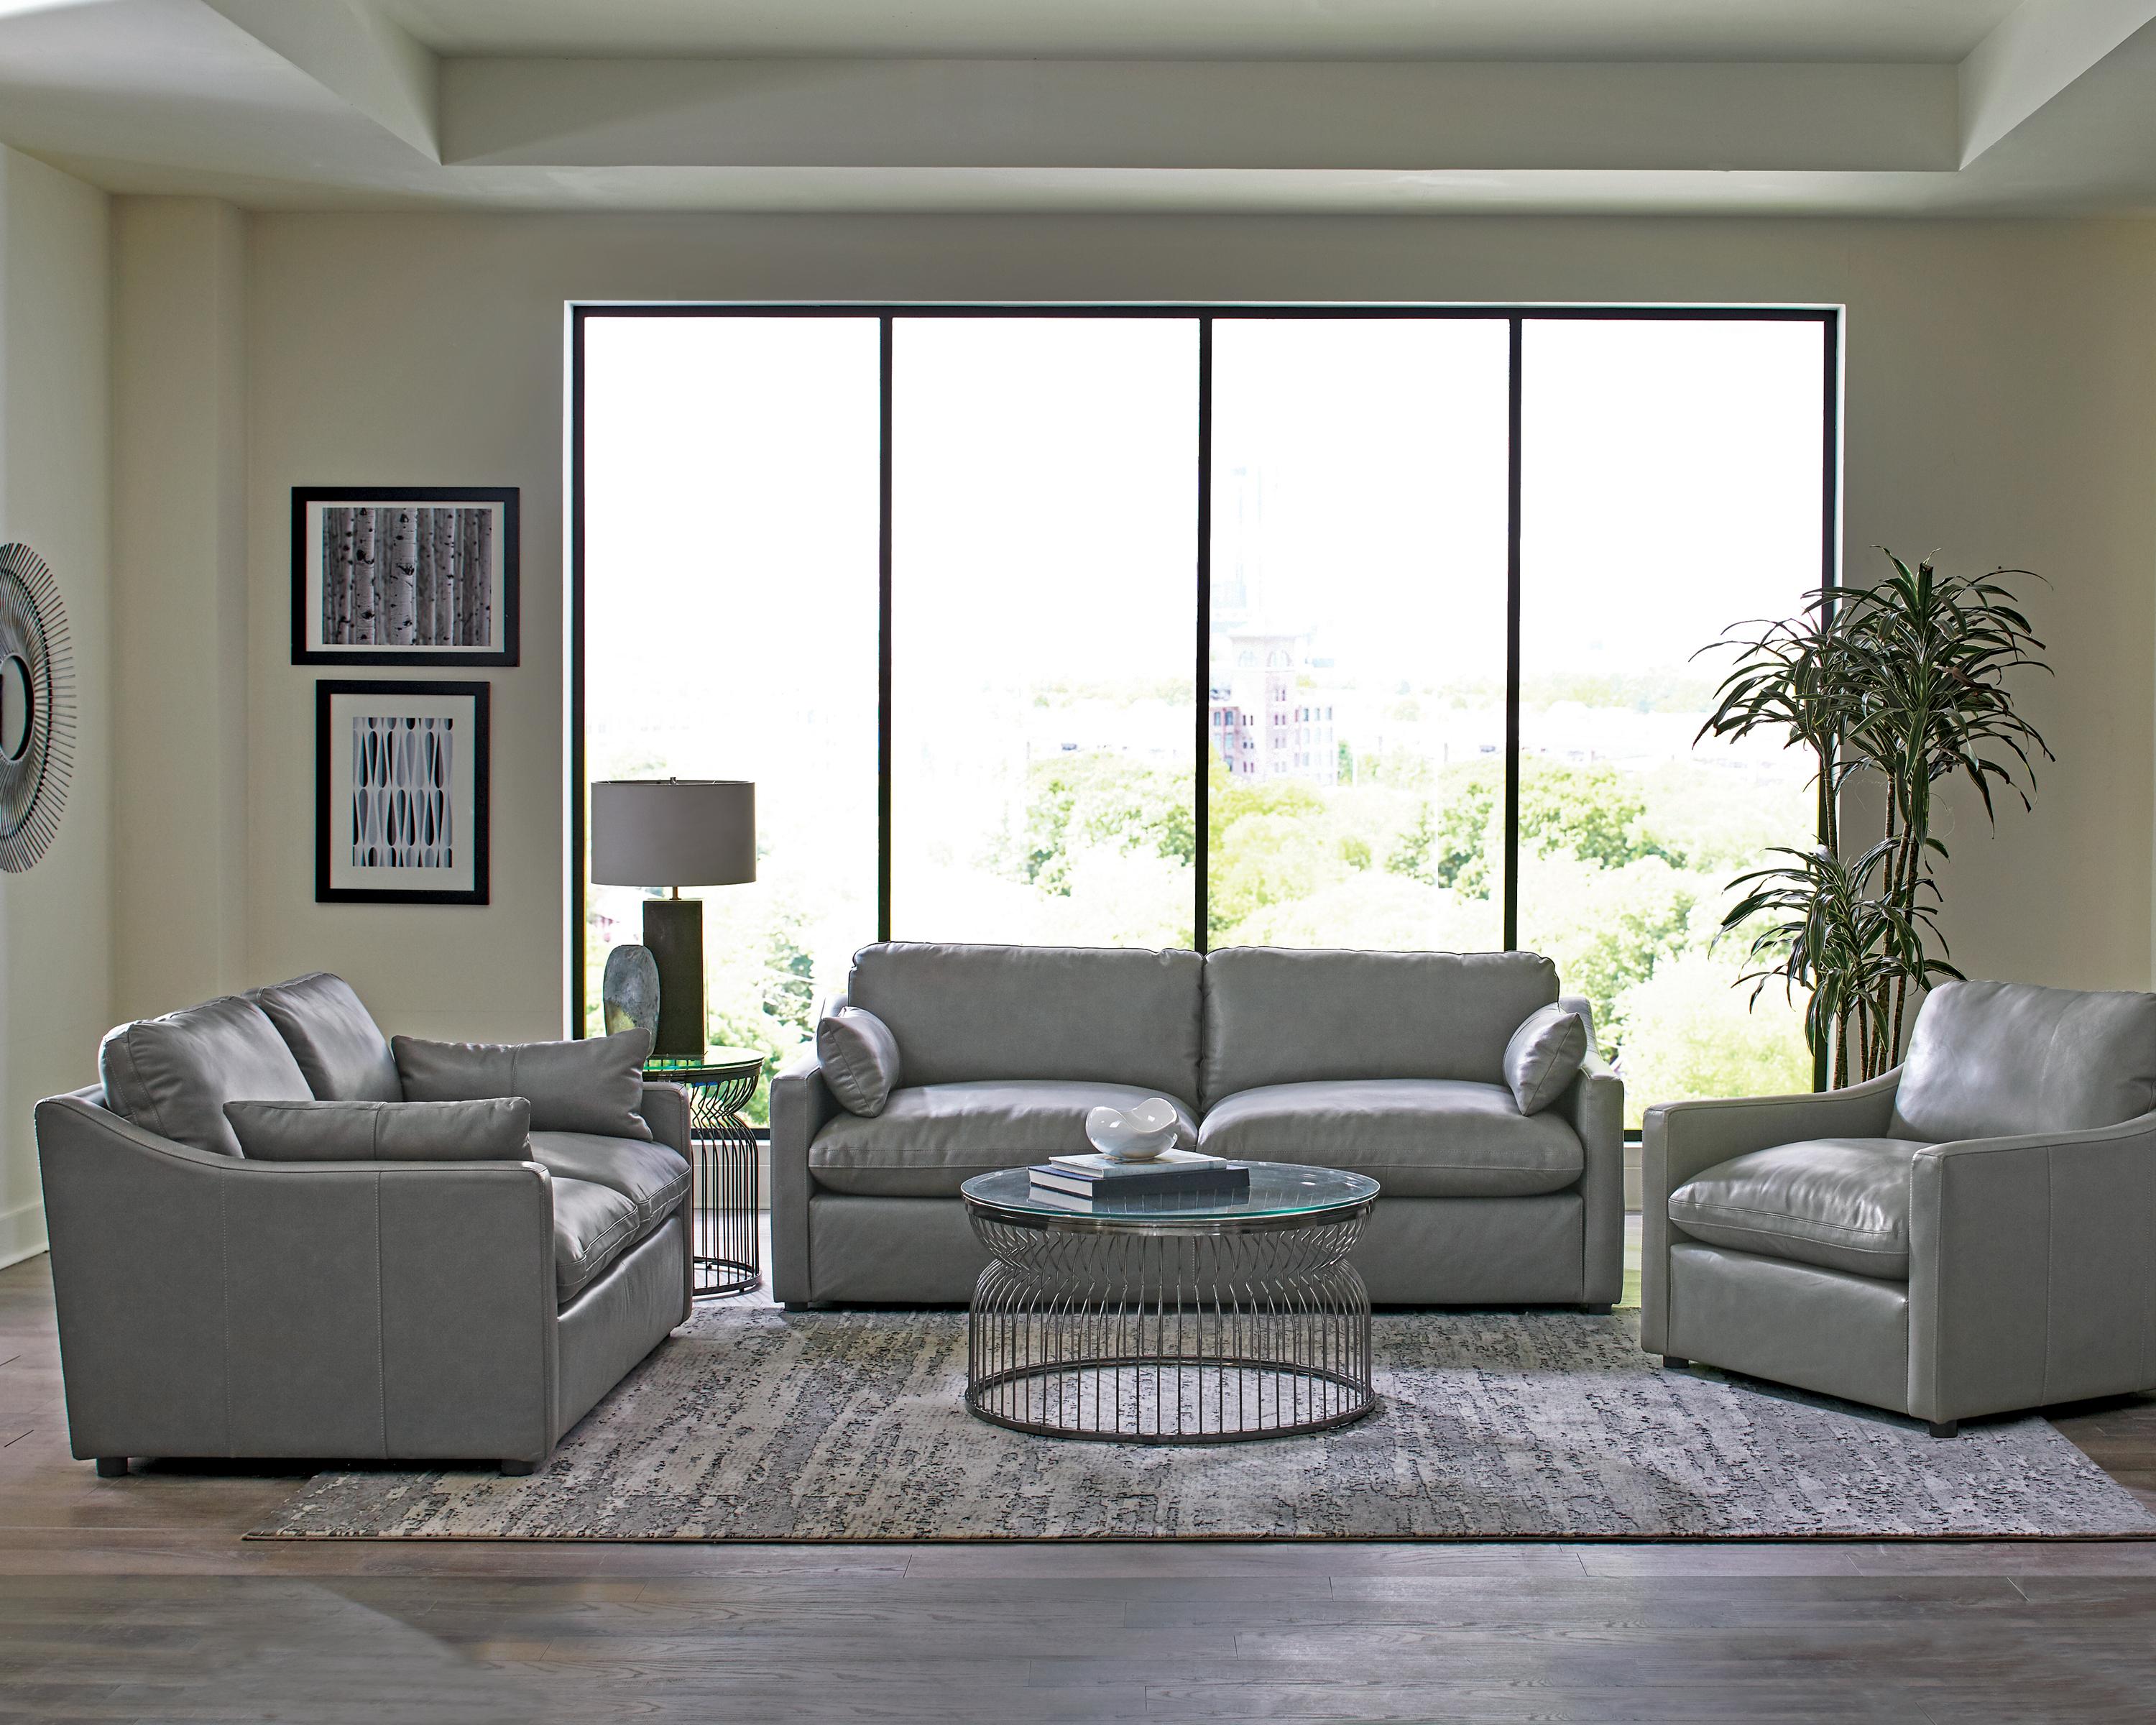 Modern Living Room Set 506771-S2 Grayson 506771-S2 in Gray Leather